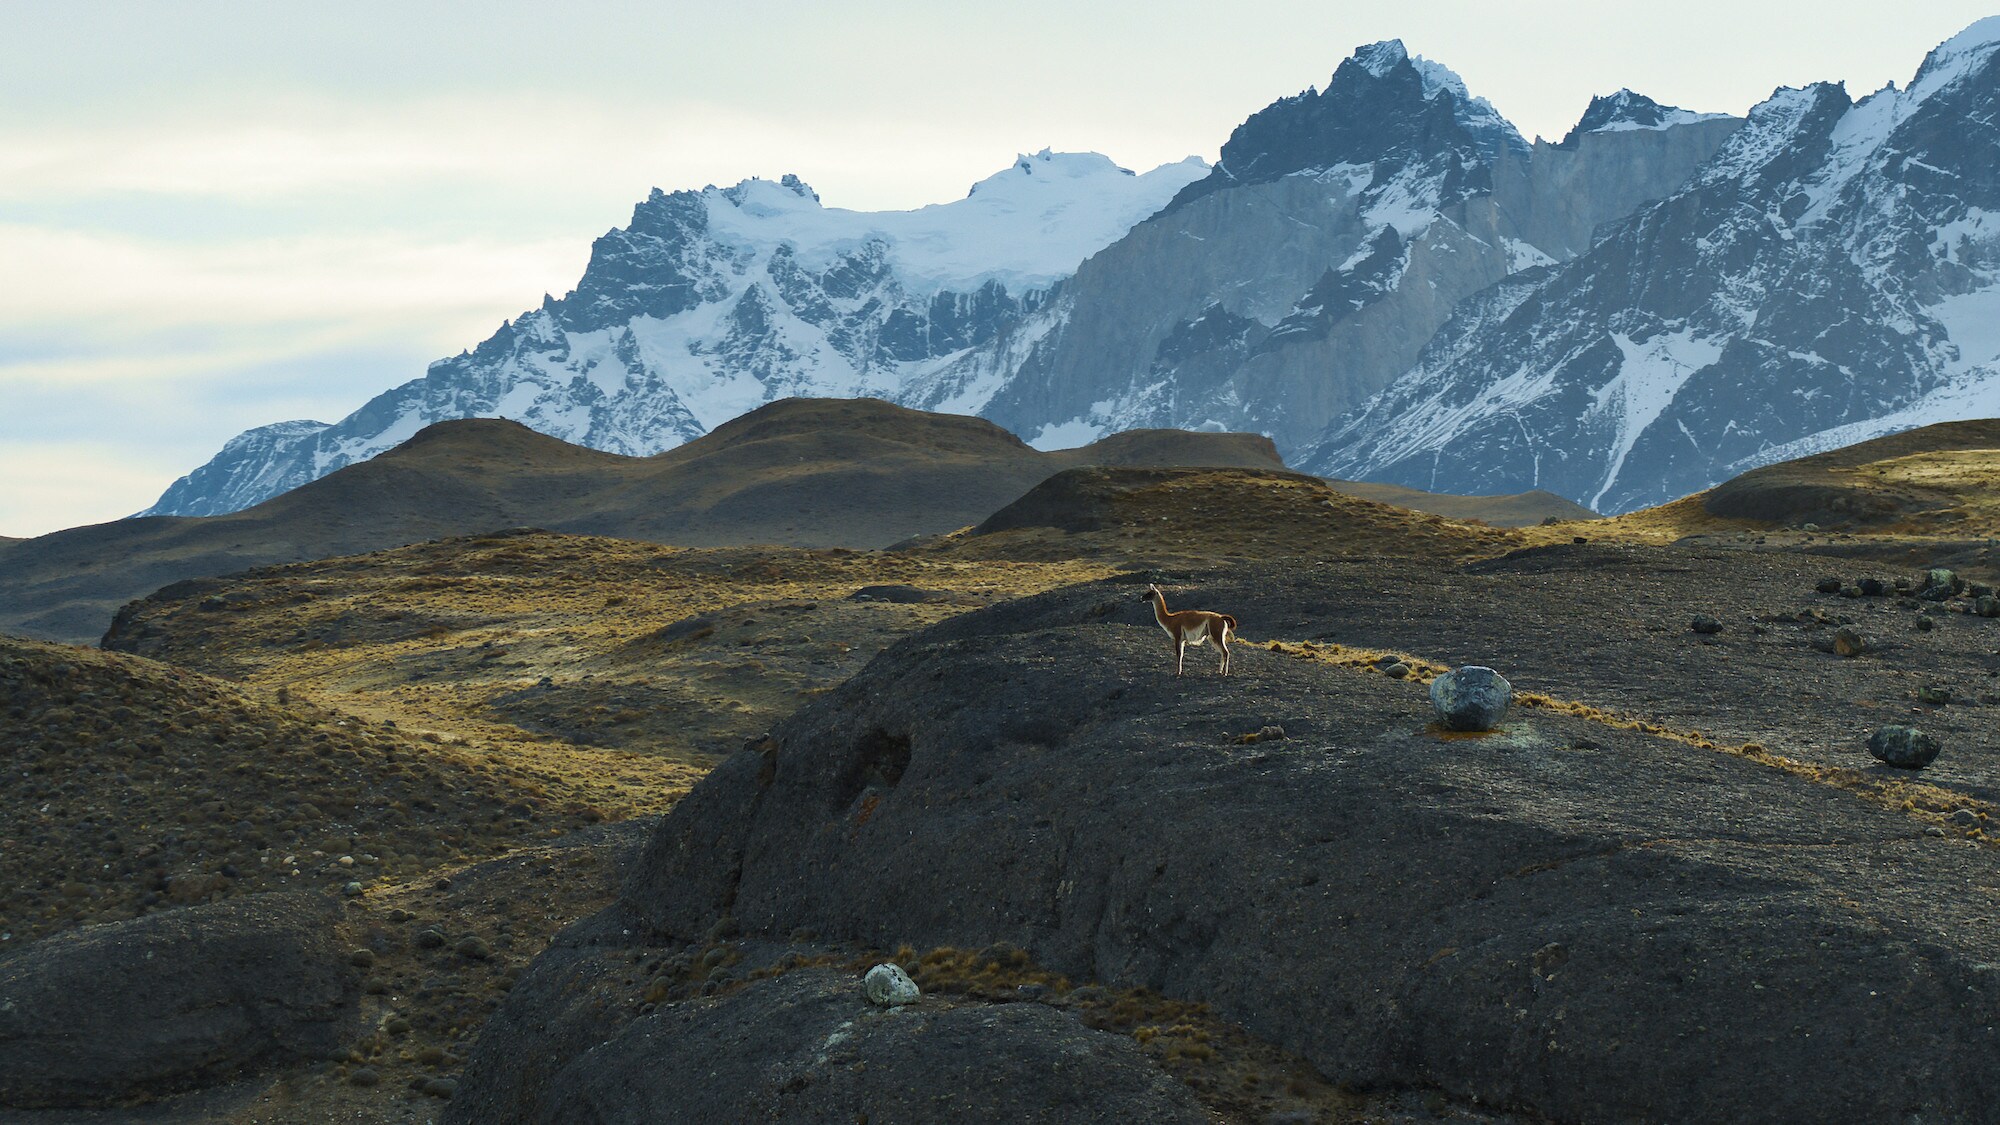 A Guanaco standing on a hill. (National Geographic for Disney+/Bertie Gregory)